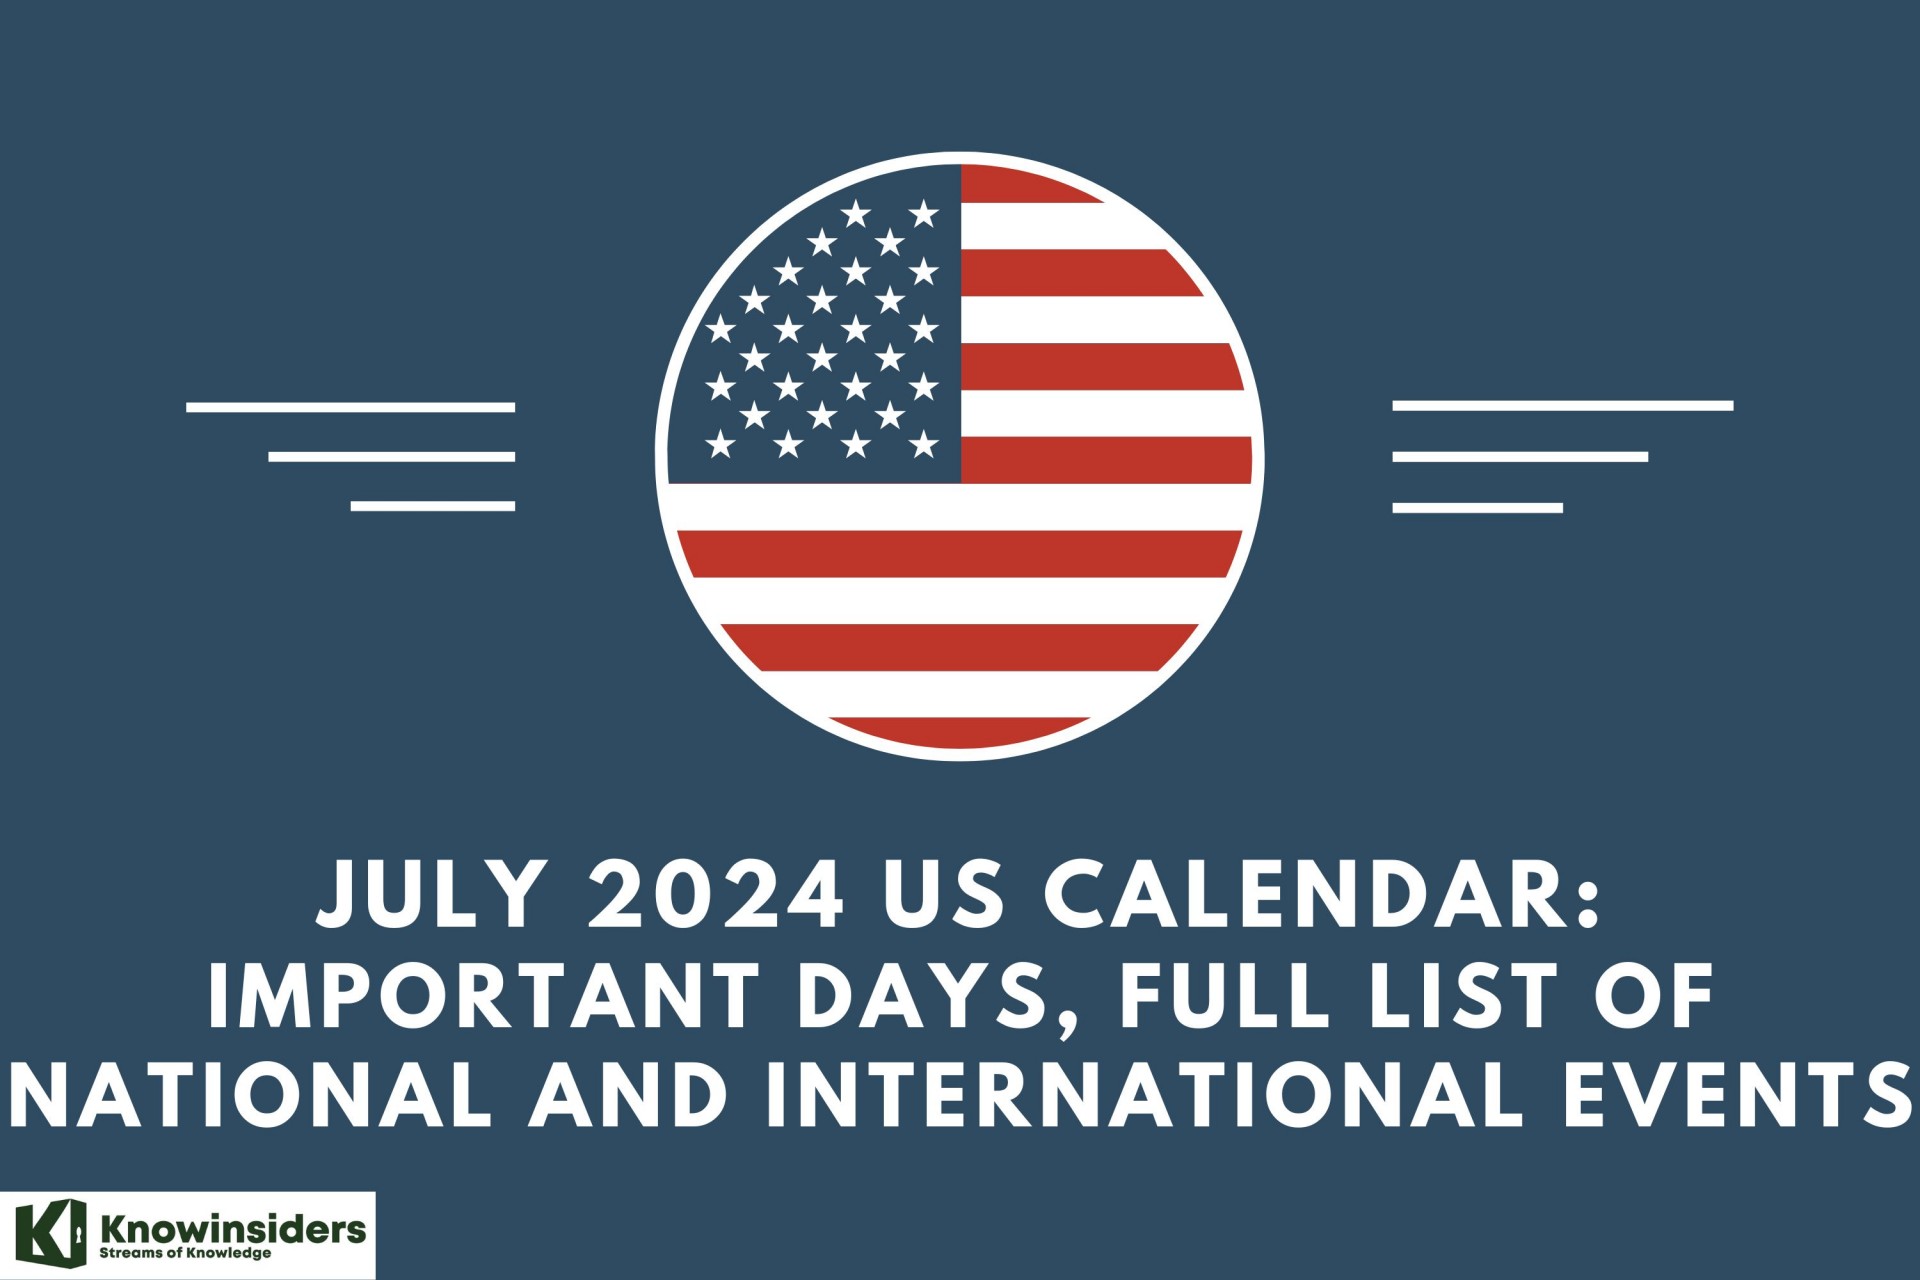 July 2024 US Calendar: Important Days, Full List of National and International Events